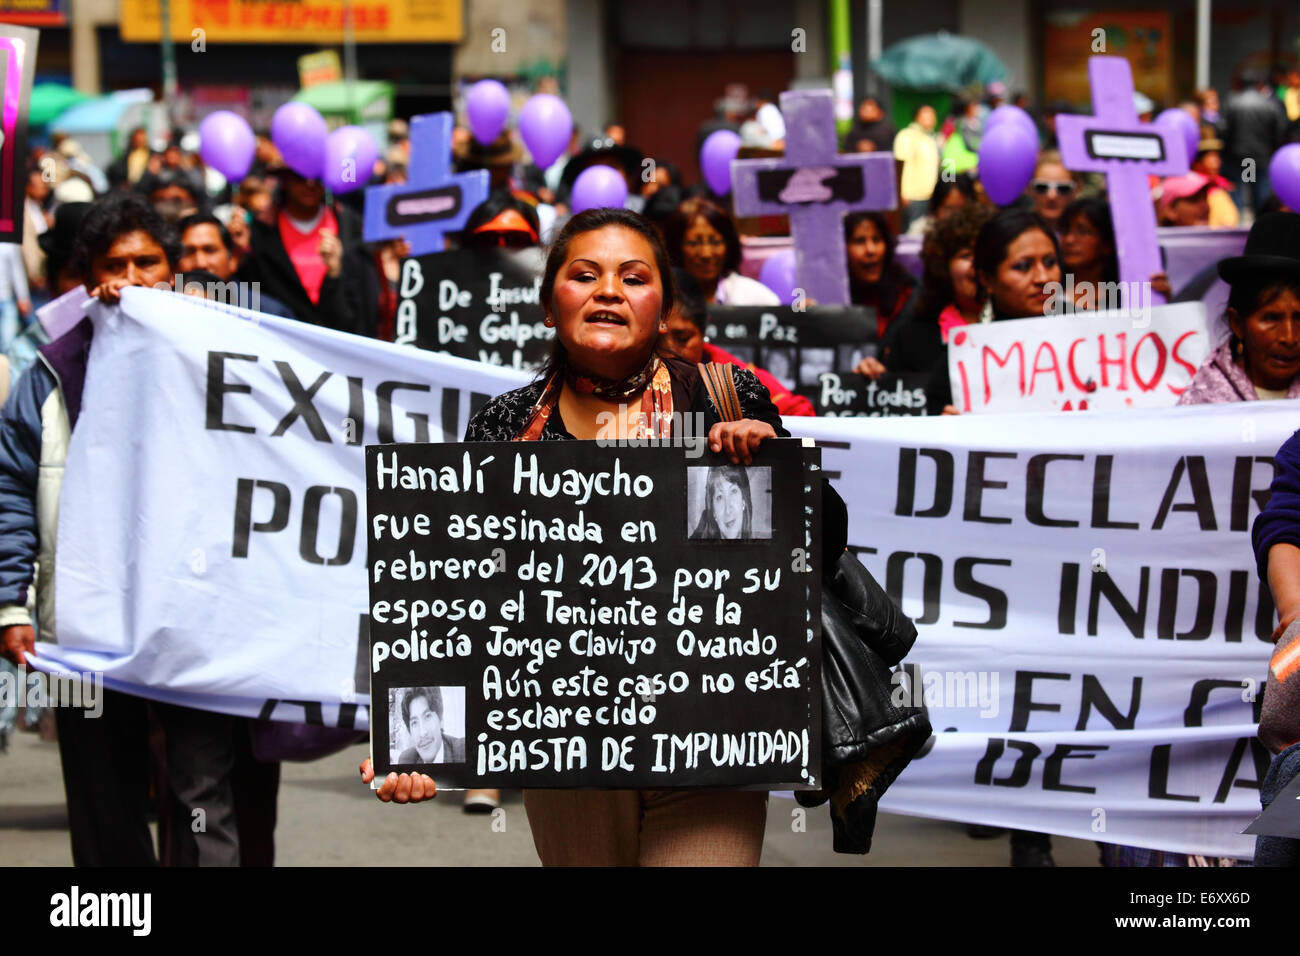 La Paz, Bolivia, 1st September 2014. A Womens Rights activist carries a placard remembering Hanali Huaycho during a march to protest against violence against women. The march was also repudiate recent statements made by several candidates during the current election campaign that appear to minimise the problem and discriminate against women. According to a WHO report in January 2013 Bolivia is the country with the highest rate of violence against women in Latin America, there have been 453 cases of femicide since 2006 during the current government. Credit:  James Brunker/Alamy Live News Stock Photo